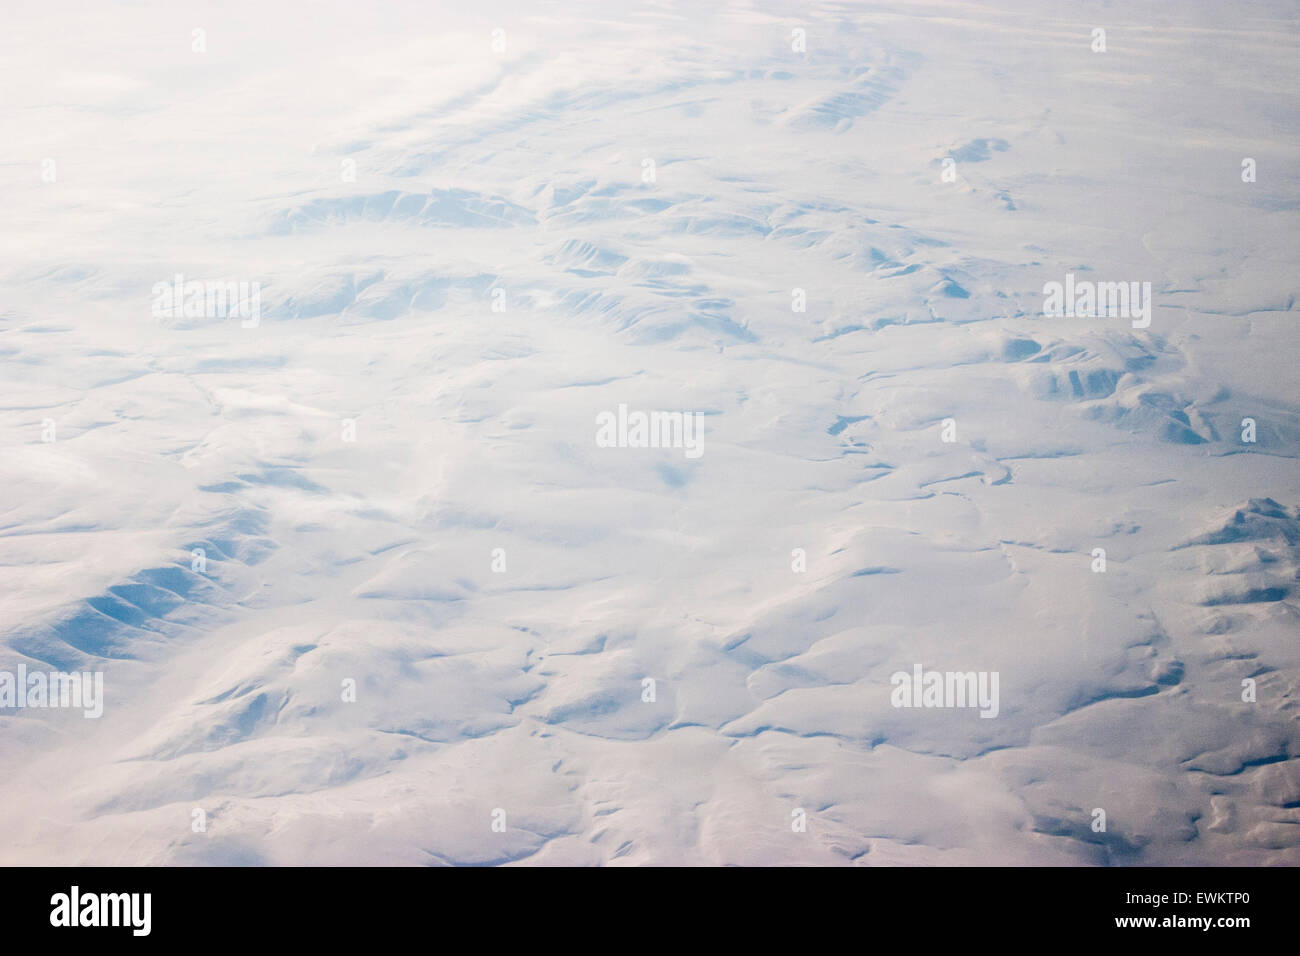 Aerial view from plane of North eastern Russia, Siberia. Tundra region covered by thick snow, view from 30,000 feet. Stock Photo